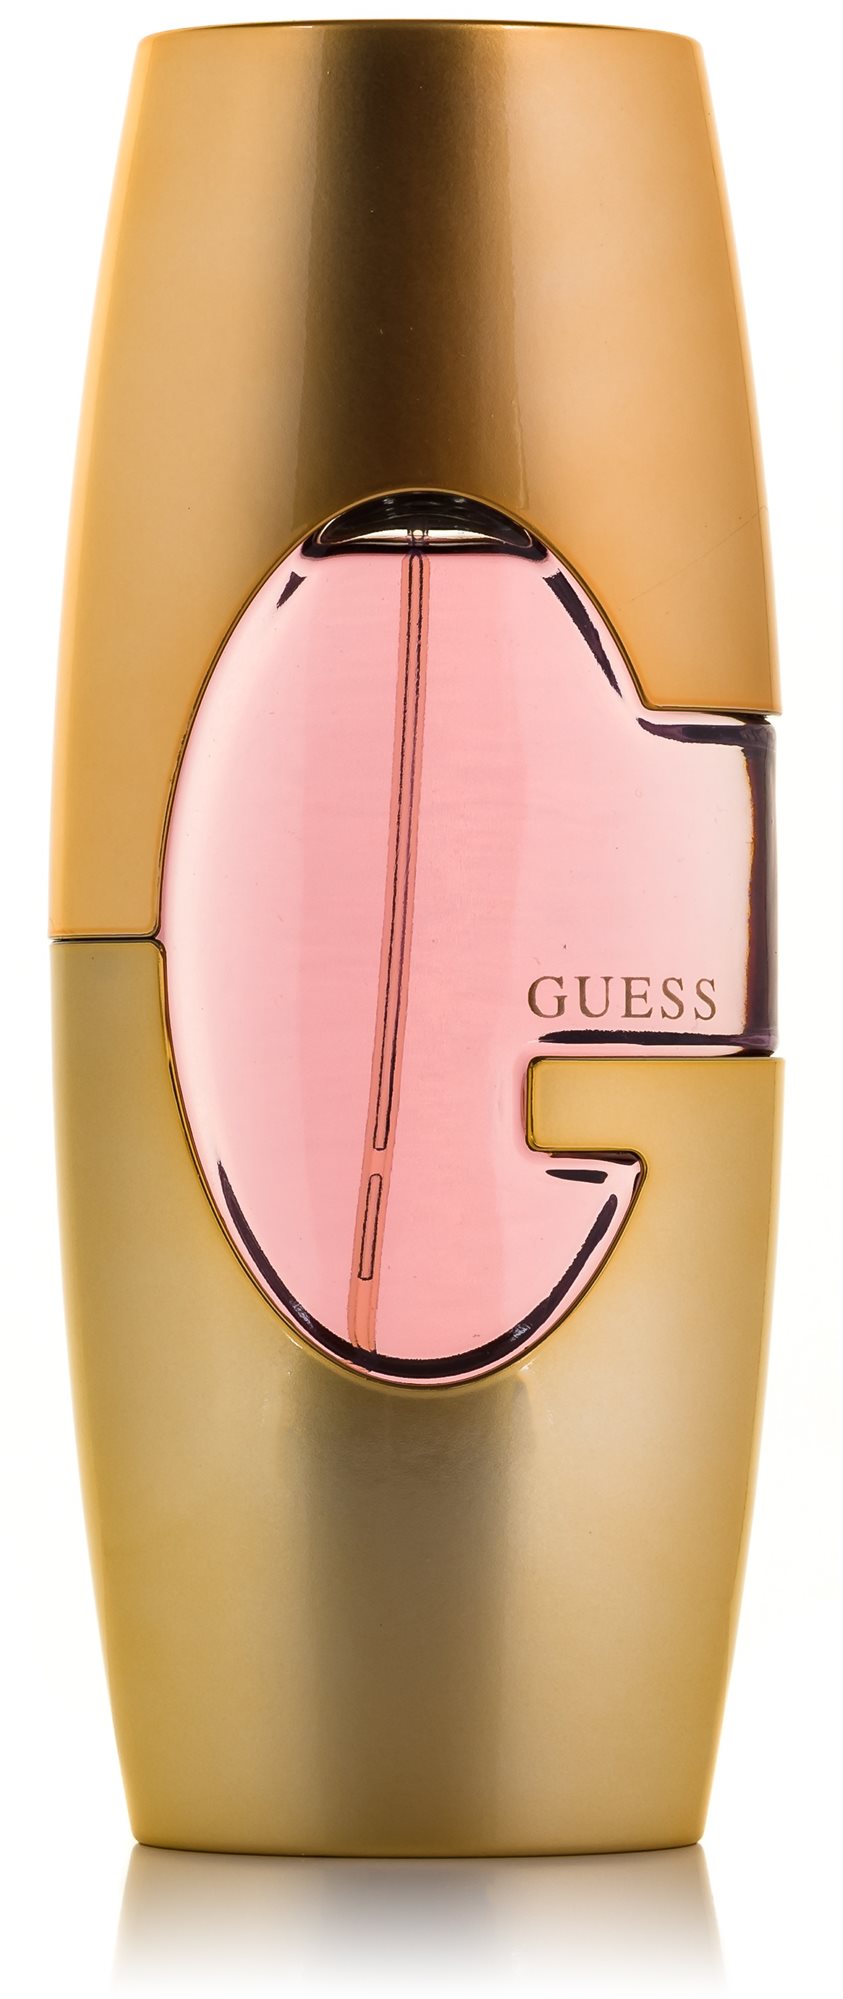 Guess Guess Gold 75 ml